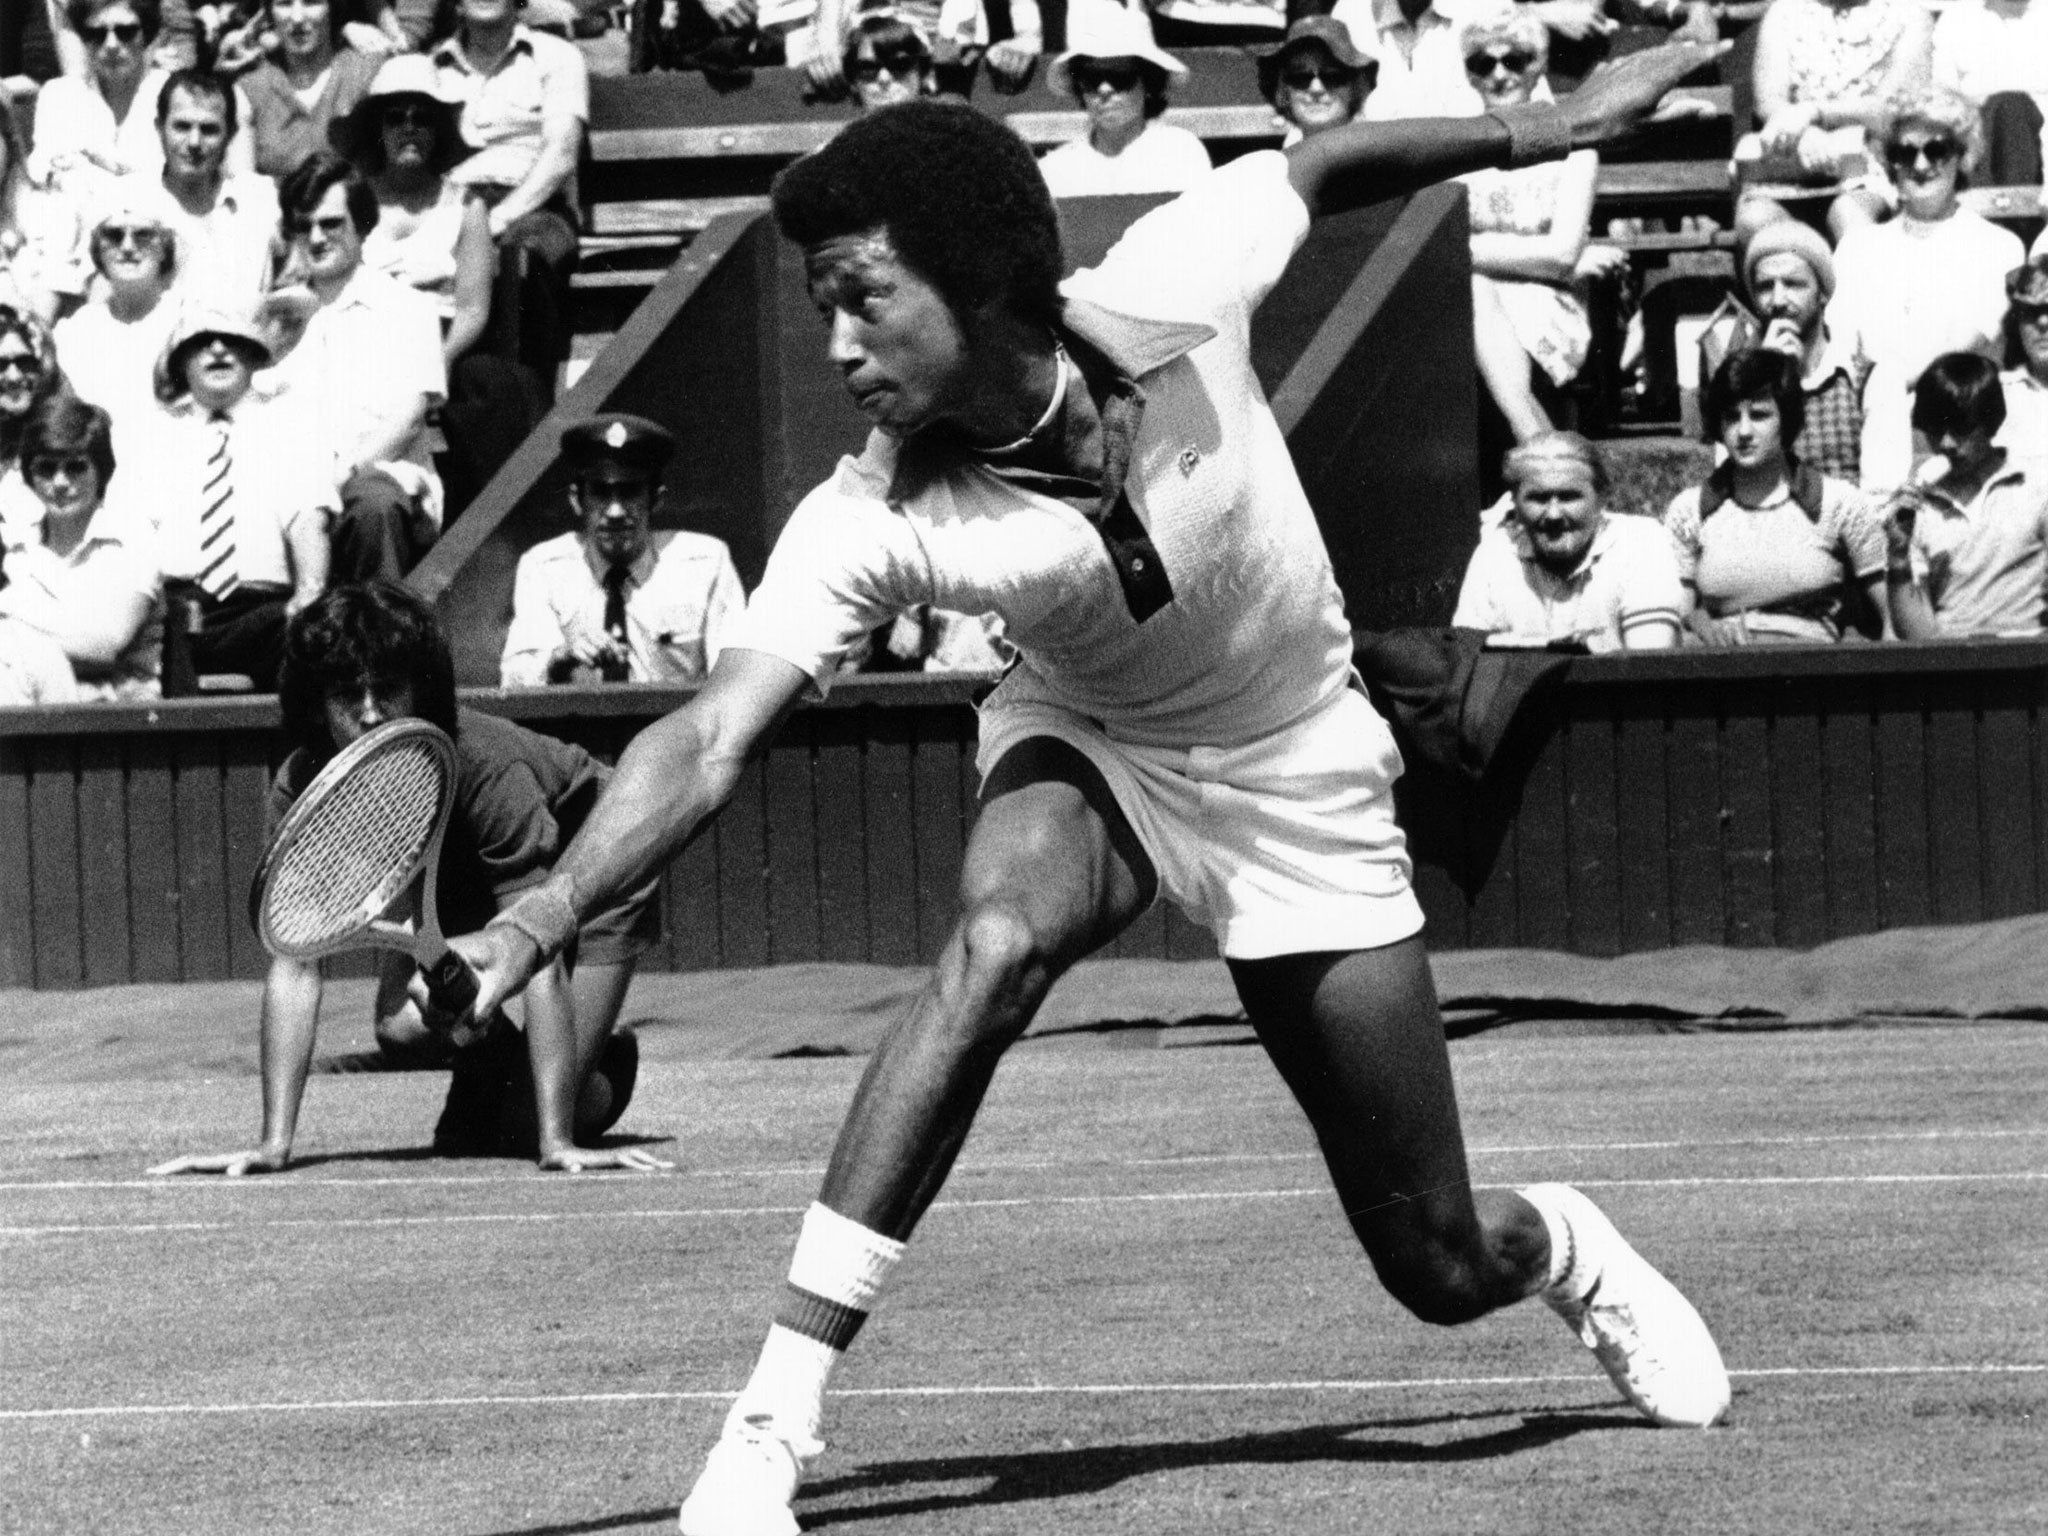 Arthur Ashe plays a backhand at Wimbledon back in 1975